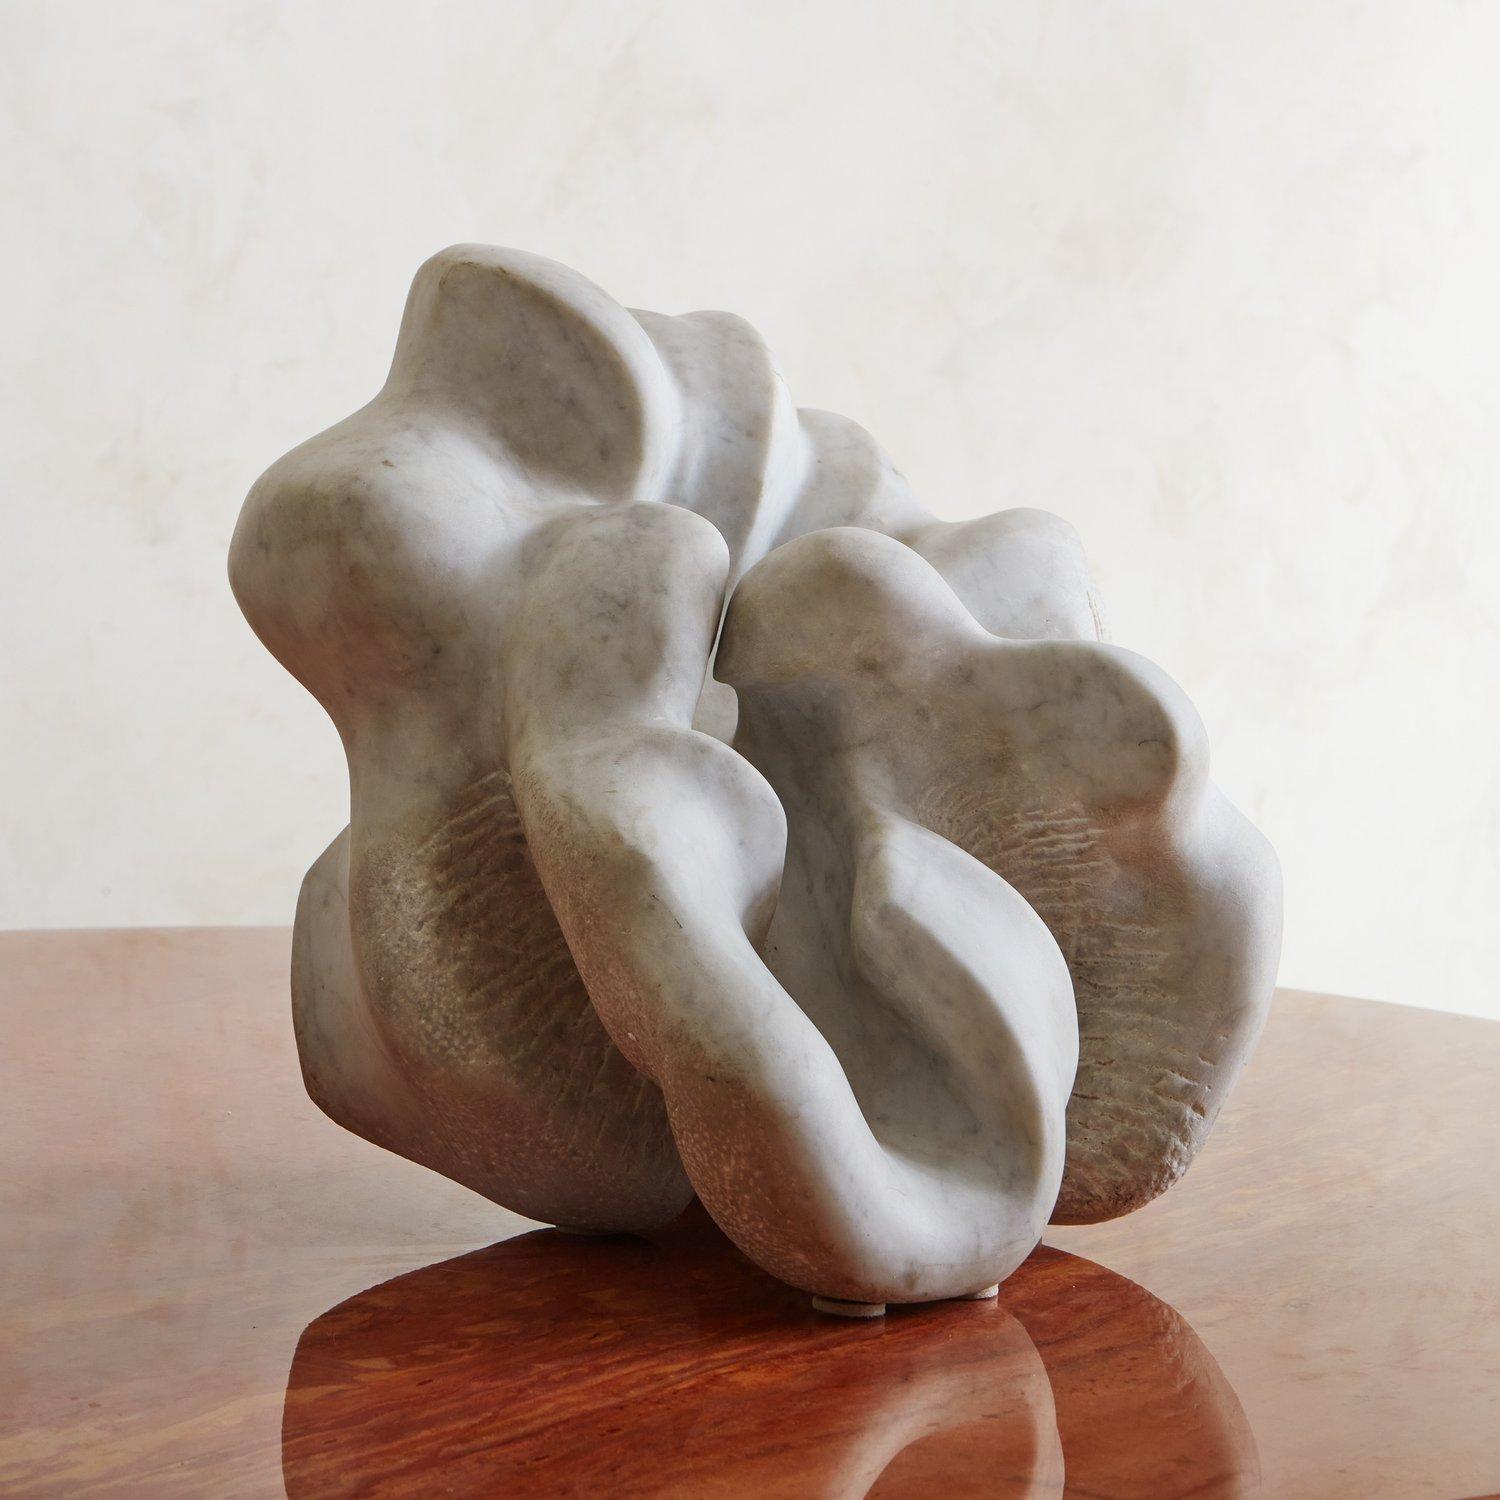 An abstract sculpture hand carved from a beautiful Statuarietto white marble with striking gray veining. We love the organic curves, freeform shape and textural details on this vintage beauty. Unsigned.